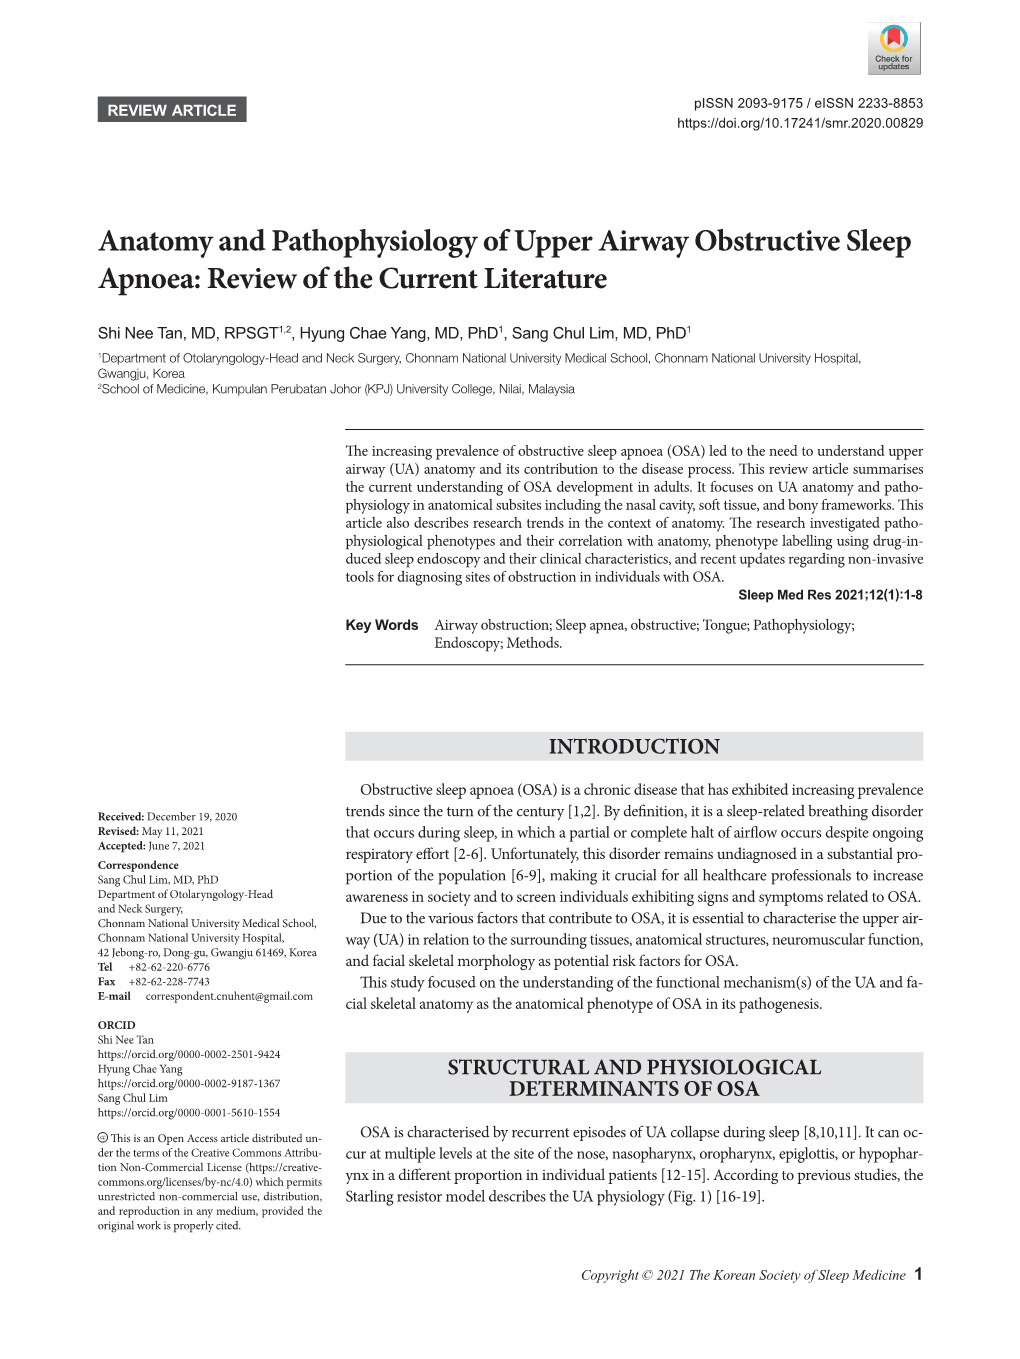 Anatomy and Pathophysiology of Upper Airway Obstructive Sleep Apnoea: Review of the Current Literature